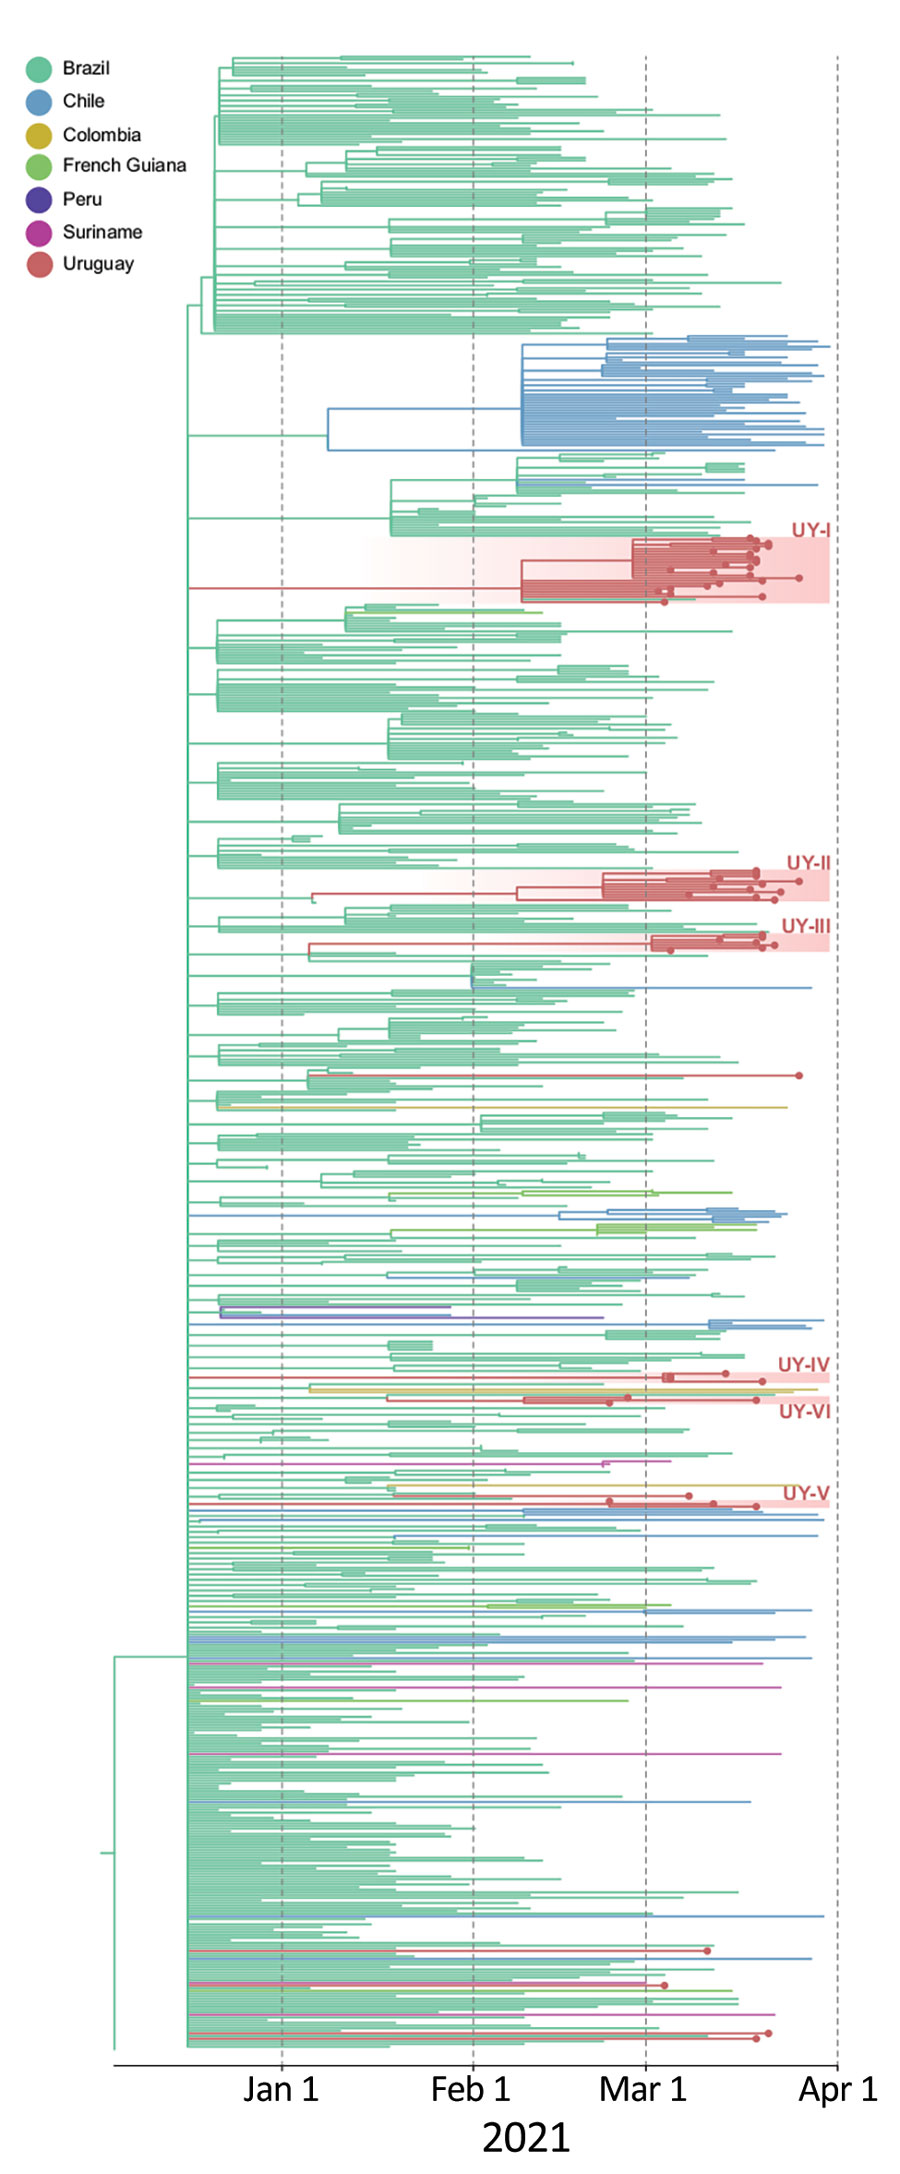 Time-scaled maximum likelihood Bayesian phylogeographic maximum clade credibility tree of 59 severe acute respiratory syndrome coronavirus 2 lineage P.1 whole-genome sequences from Uruguay and 691 reference sequences from South America. The tree was rooted with the EPI_ISL_833137 sequence from GISAID (https://www.gisaid.org), collected December 4, 2020. Branches are colored according to the most probable location state of their descendant nodes as indicated at the legend. Sequences from Uruguay are shown with dots at the end of the branch. Red shading indicates clades from Uruguay and their distribution along the P.1 tree demonstrates >12 independent introductions and locally transmitted clusters of 3–24 sequences. The tree suggests Brazil has been the source of P.1 dissemination to Uruguay and other countries in South America. 